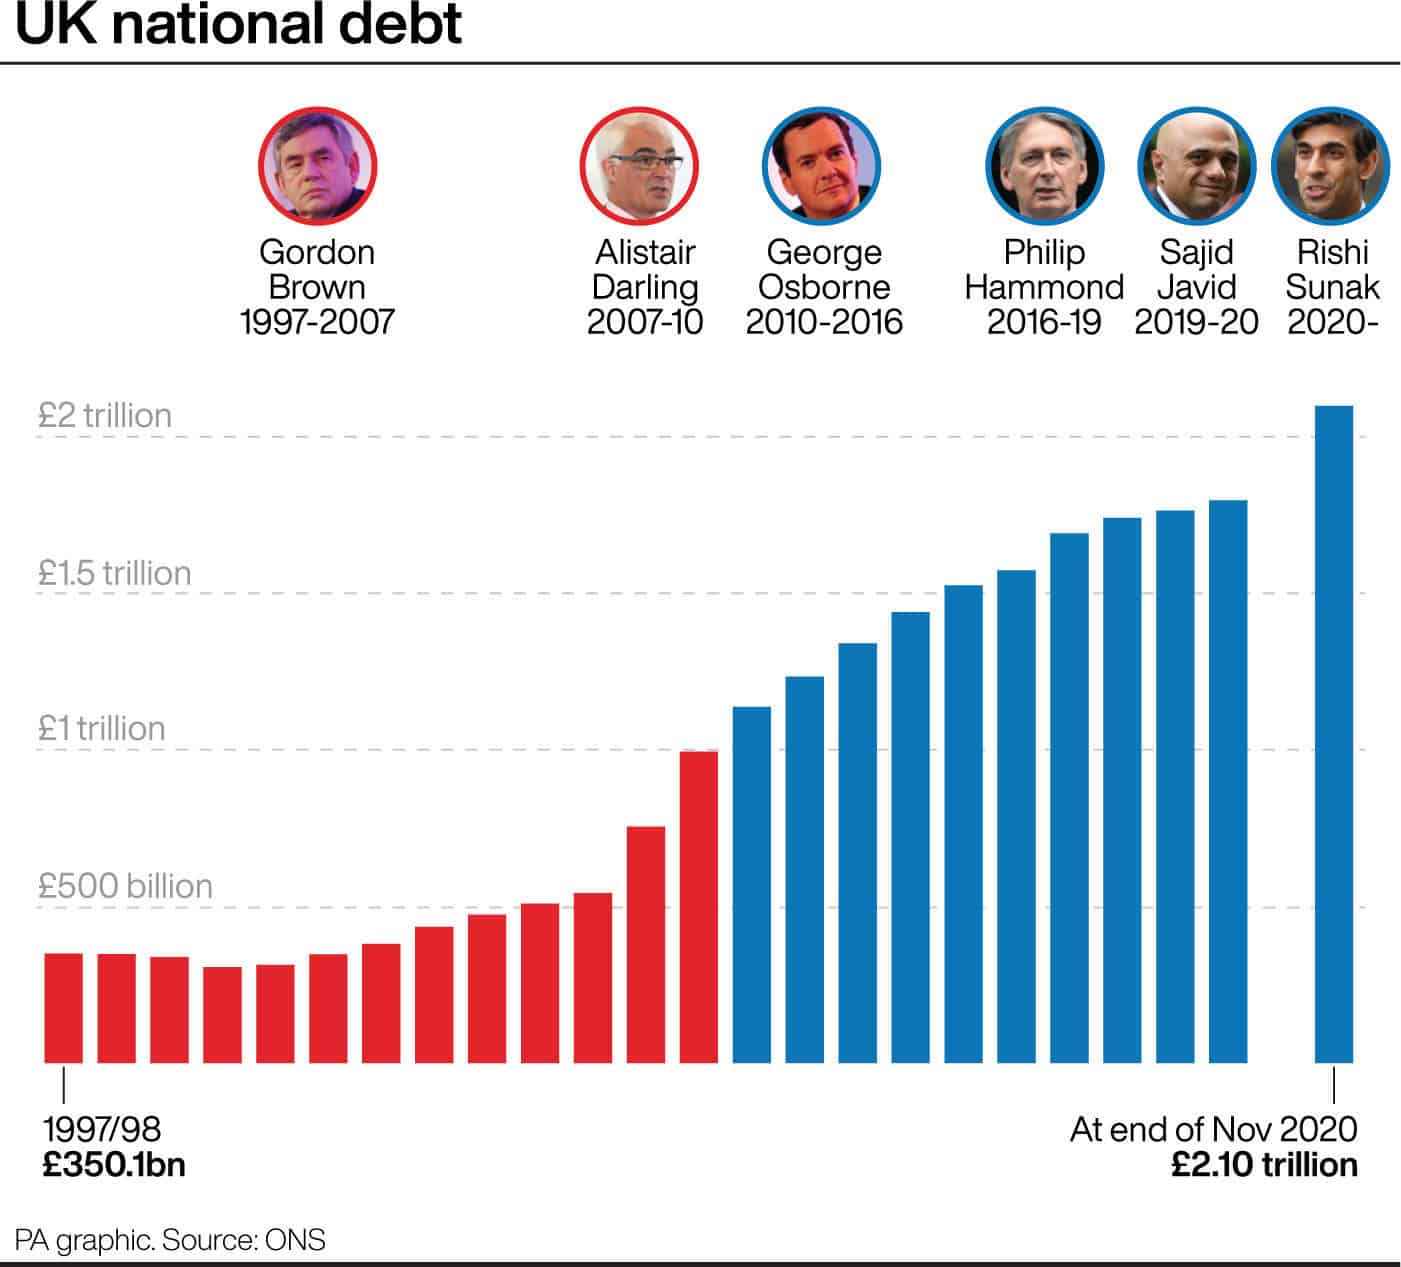 Watch what happens to the UK’s debt pile under the Conservatives